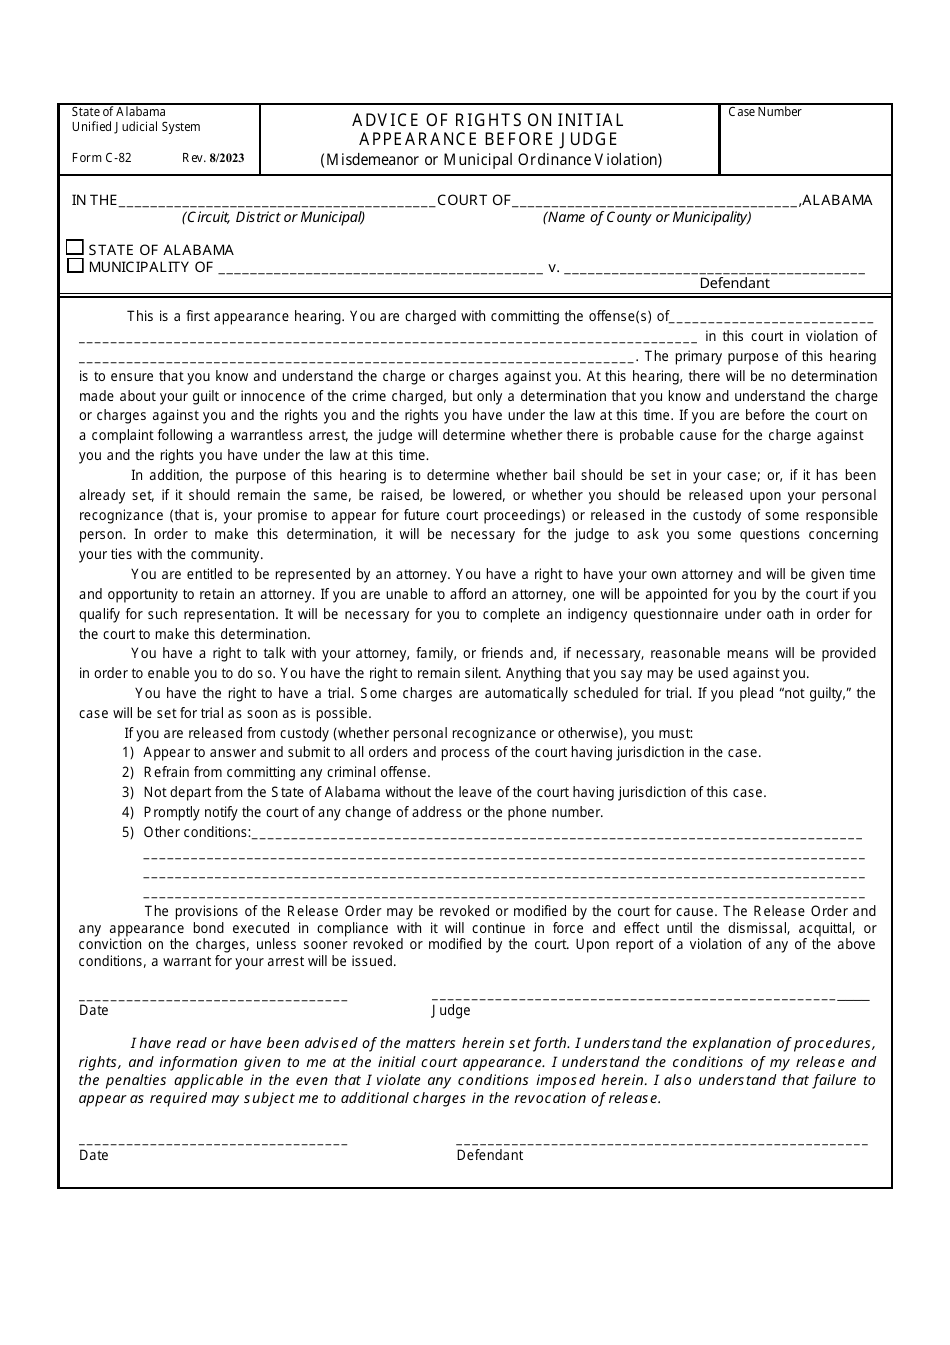 Form C-82 Advice of Rights on Initial Appearance Before Judge (Misdemeanor or Municipal Ordinance Violation) - Alabama, Page 1